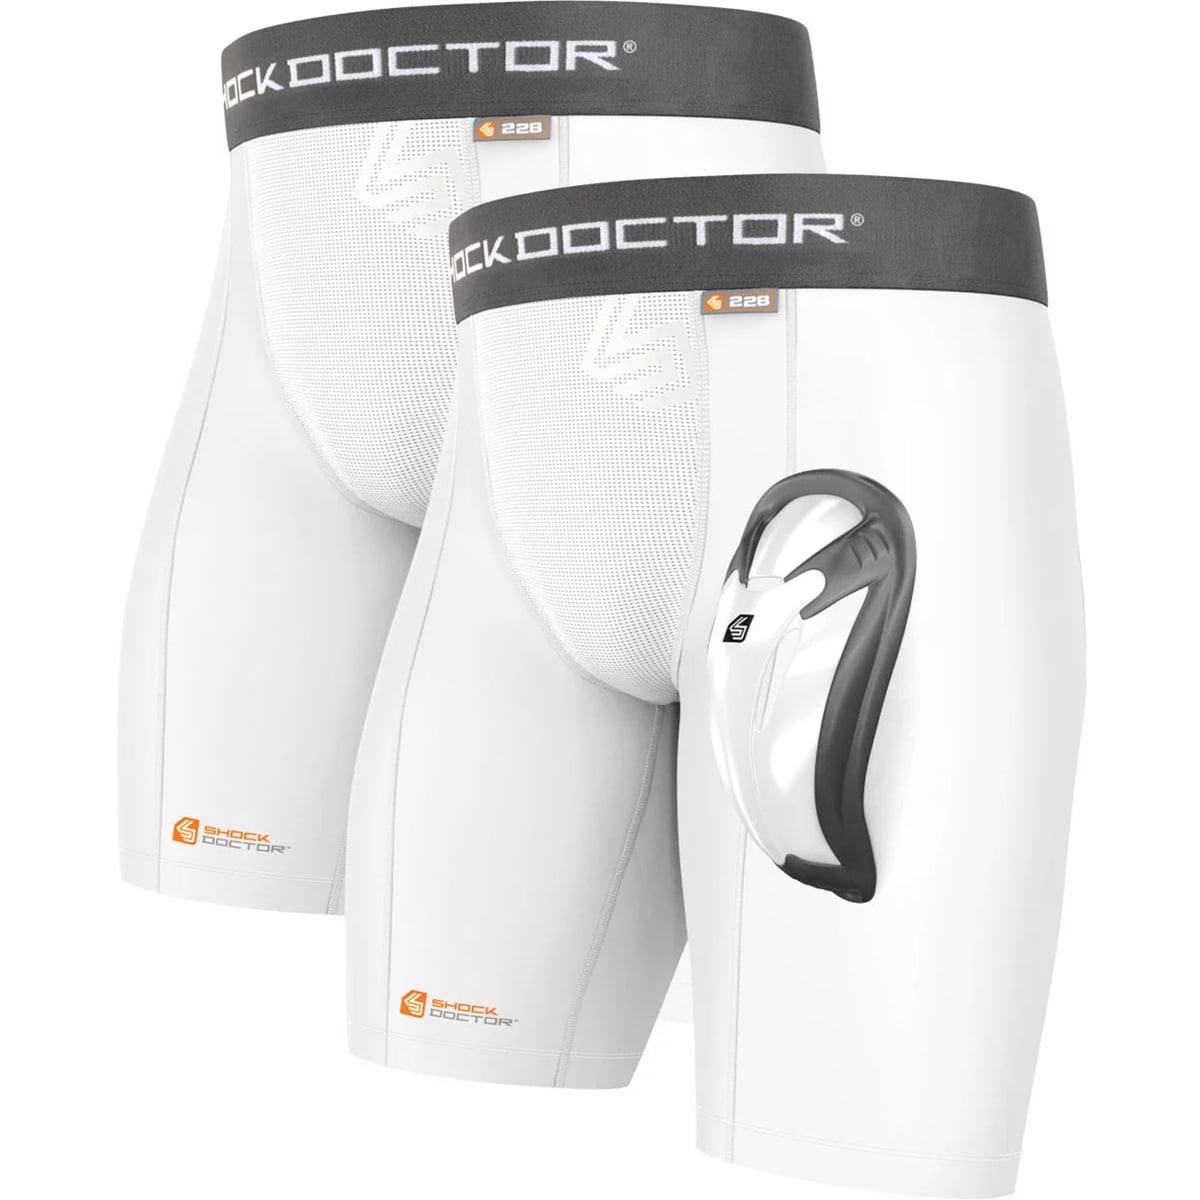 Shock Doctor Core BioFlex Cup, Red, Youth Small